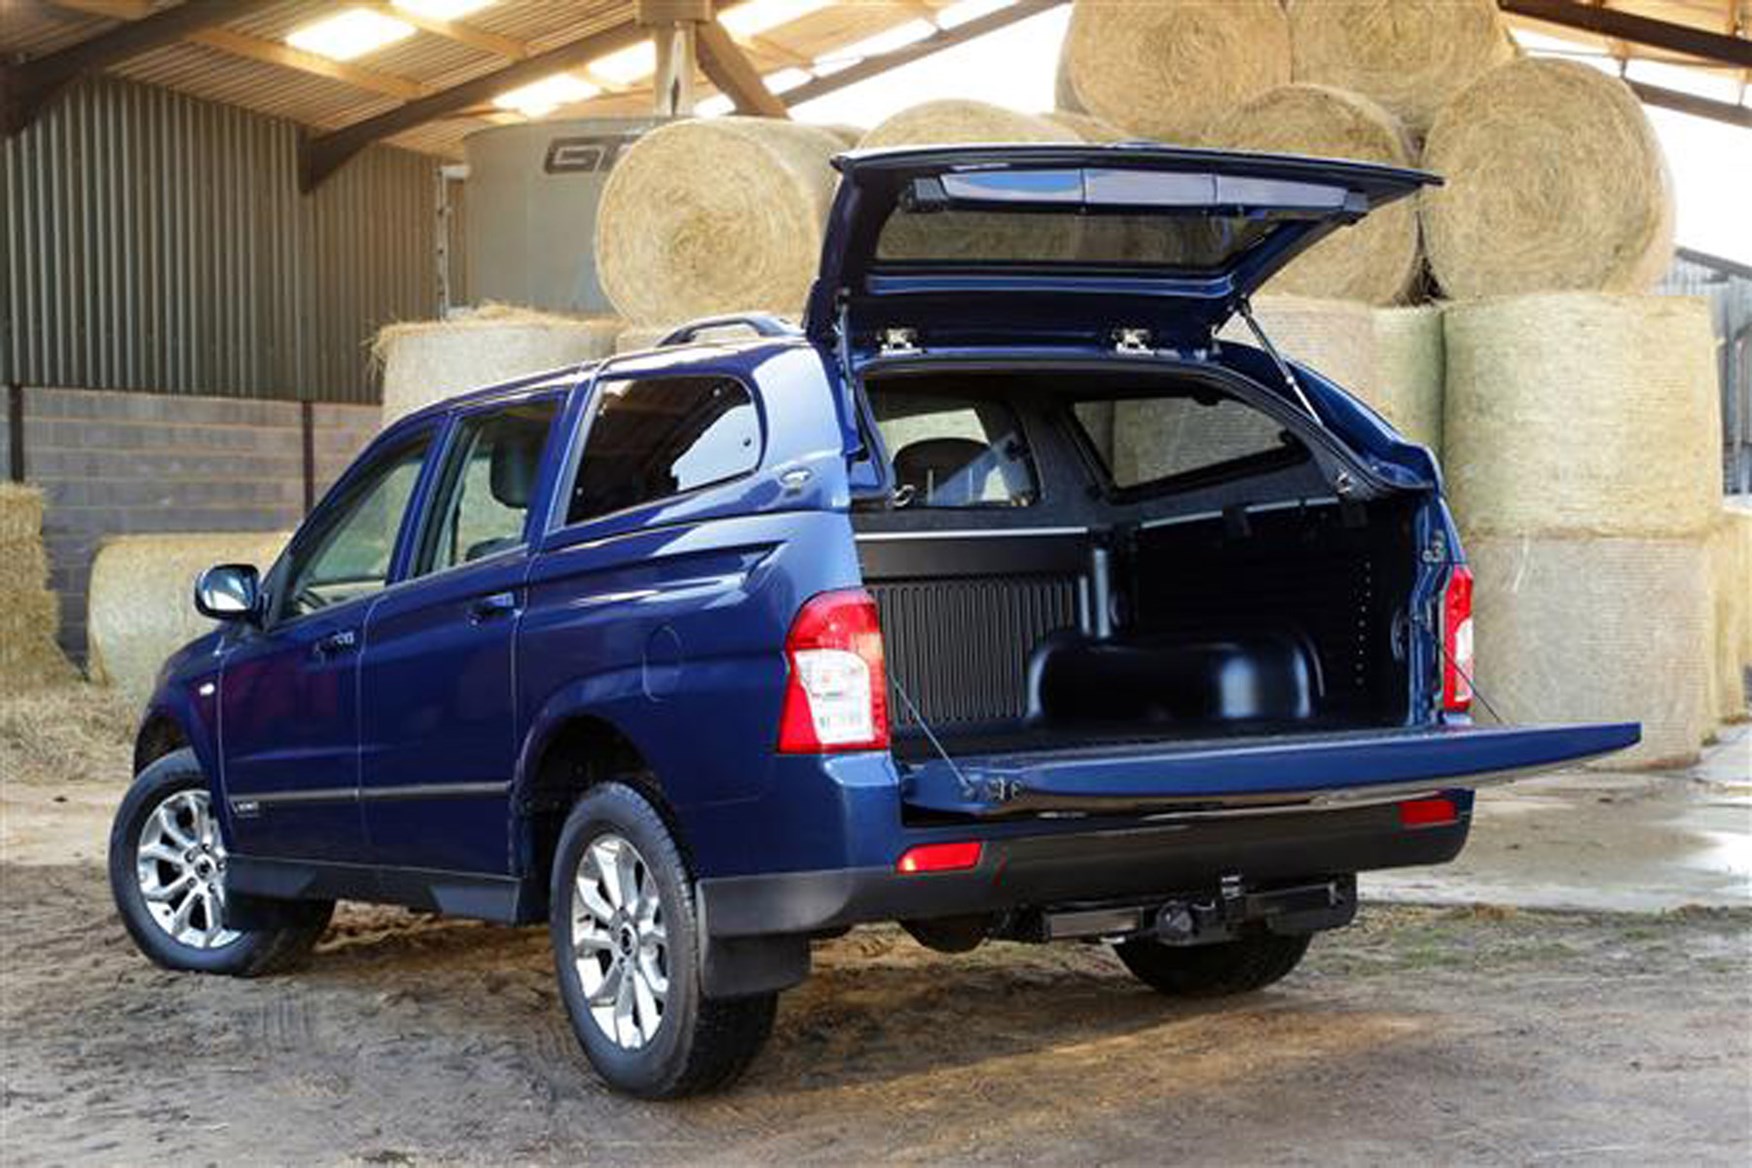 SsangYong Korando Sports review on Parkers Vans - load area capacity